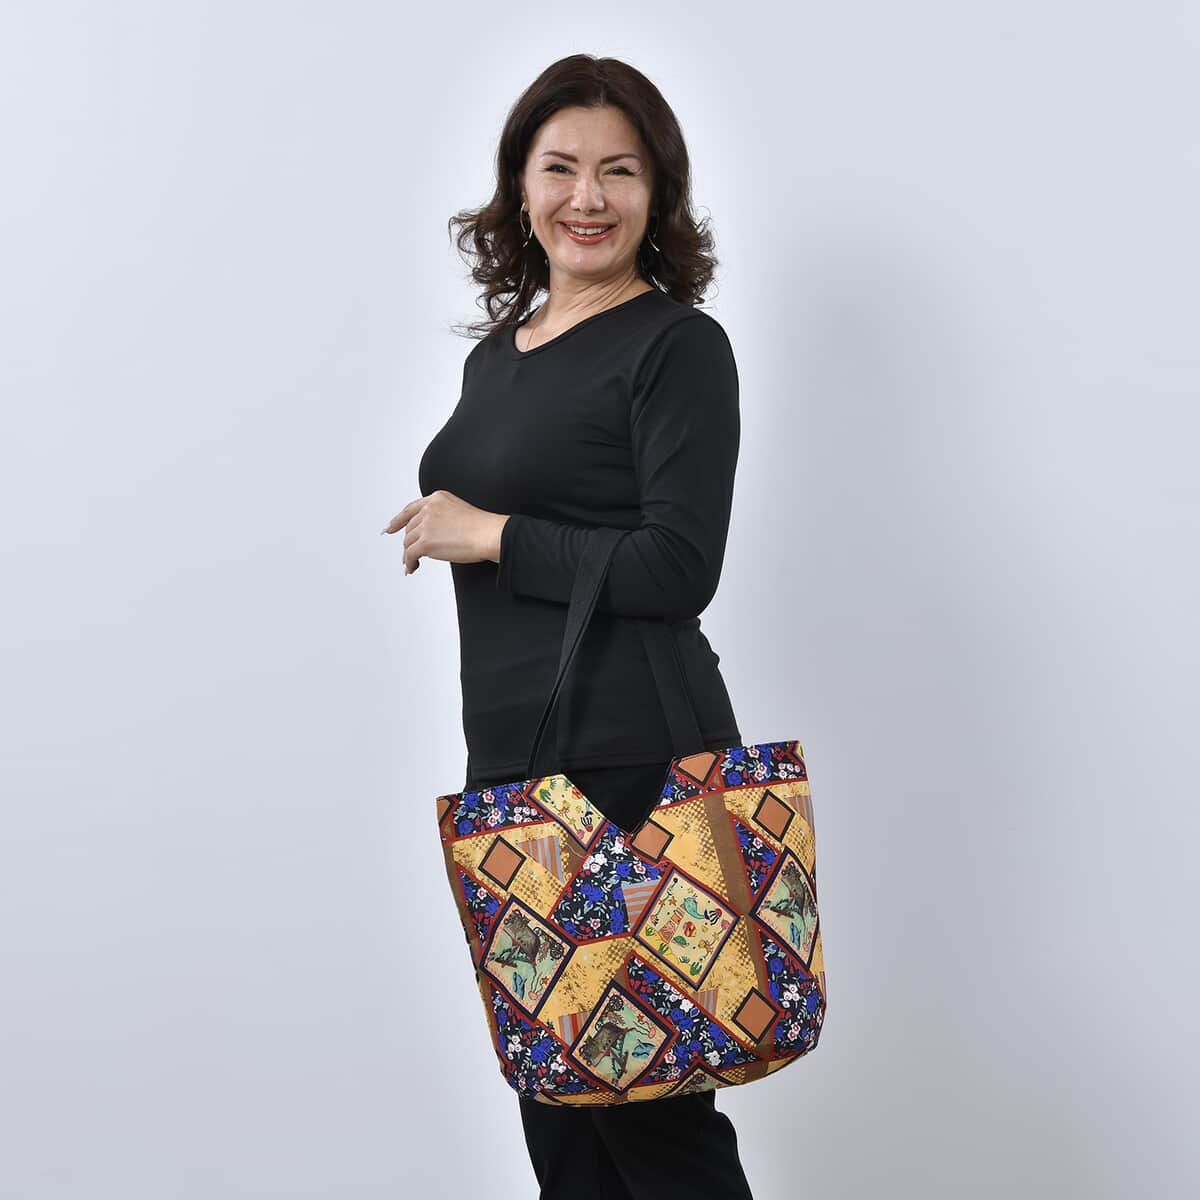 Yellow Patchwork Printed Pattern Tote Bag (17.5"x6"x13.5") with Handle Drop image number 1